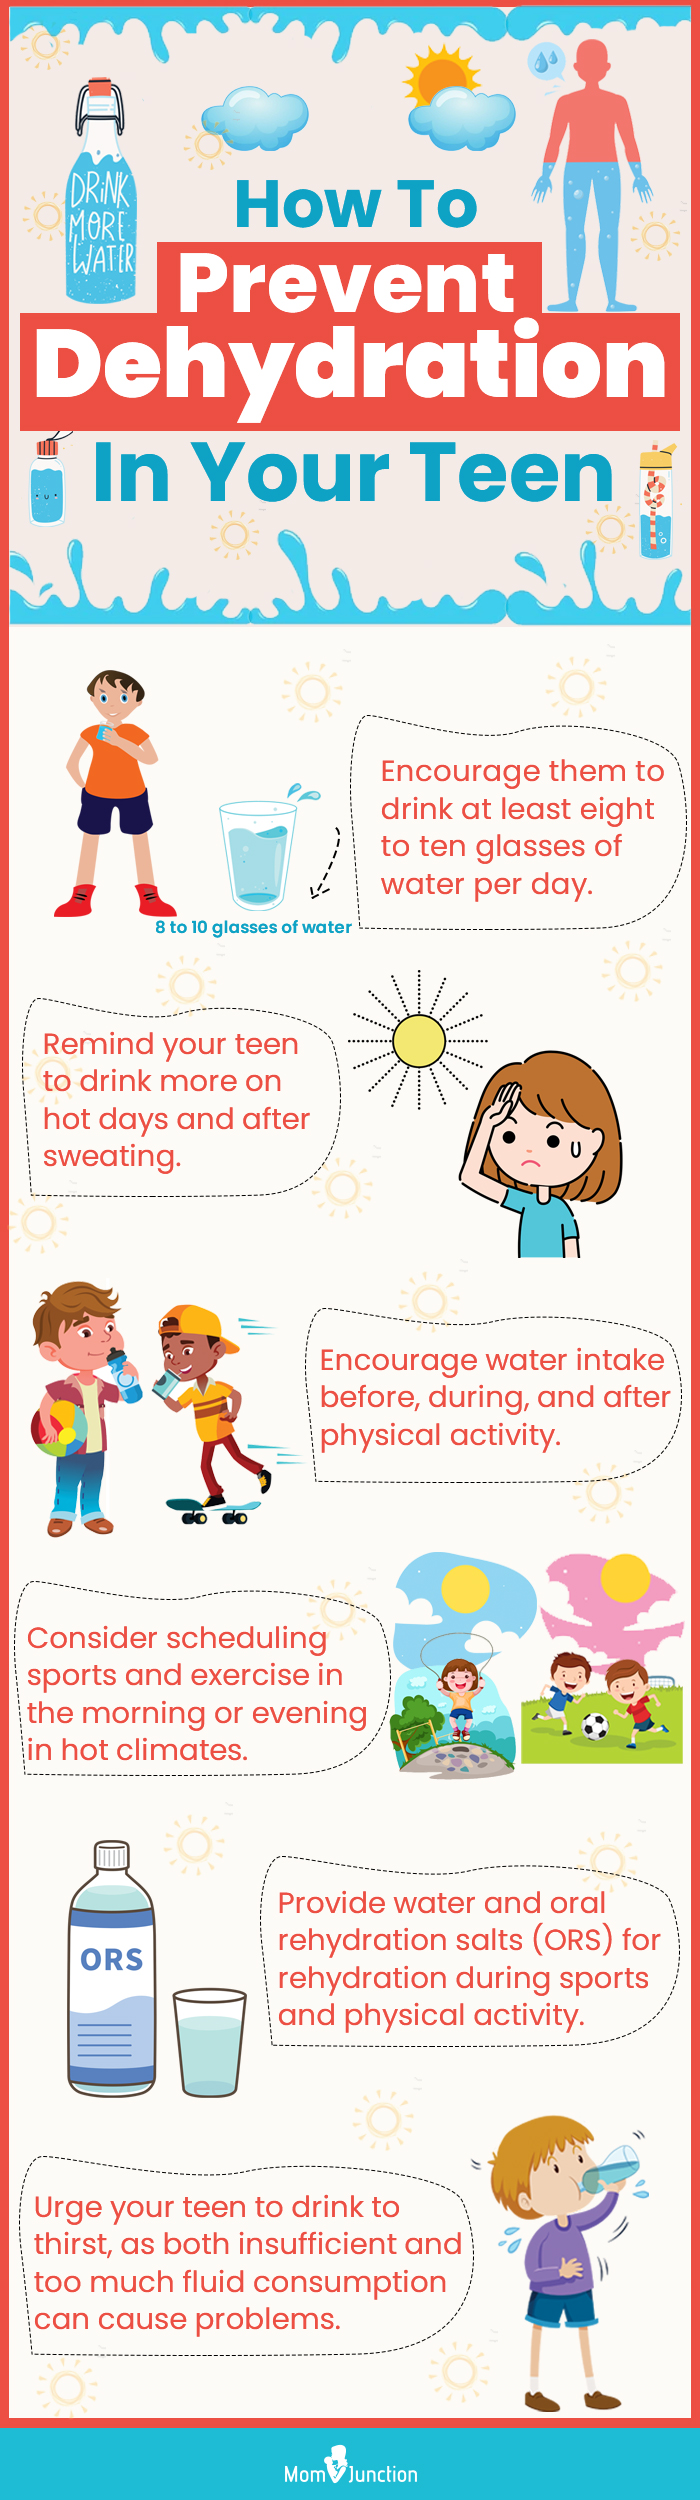 how to prevent dehydration in your teen (infographic)